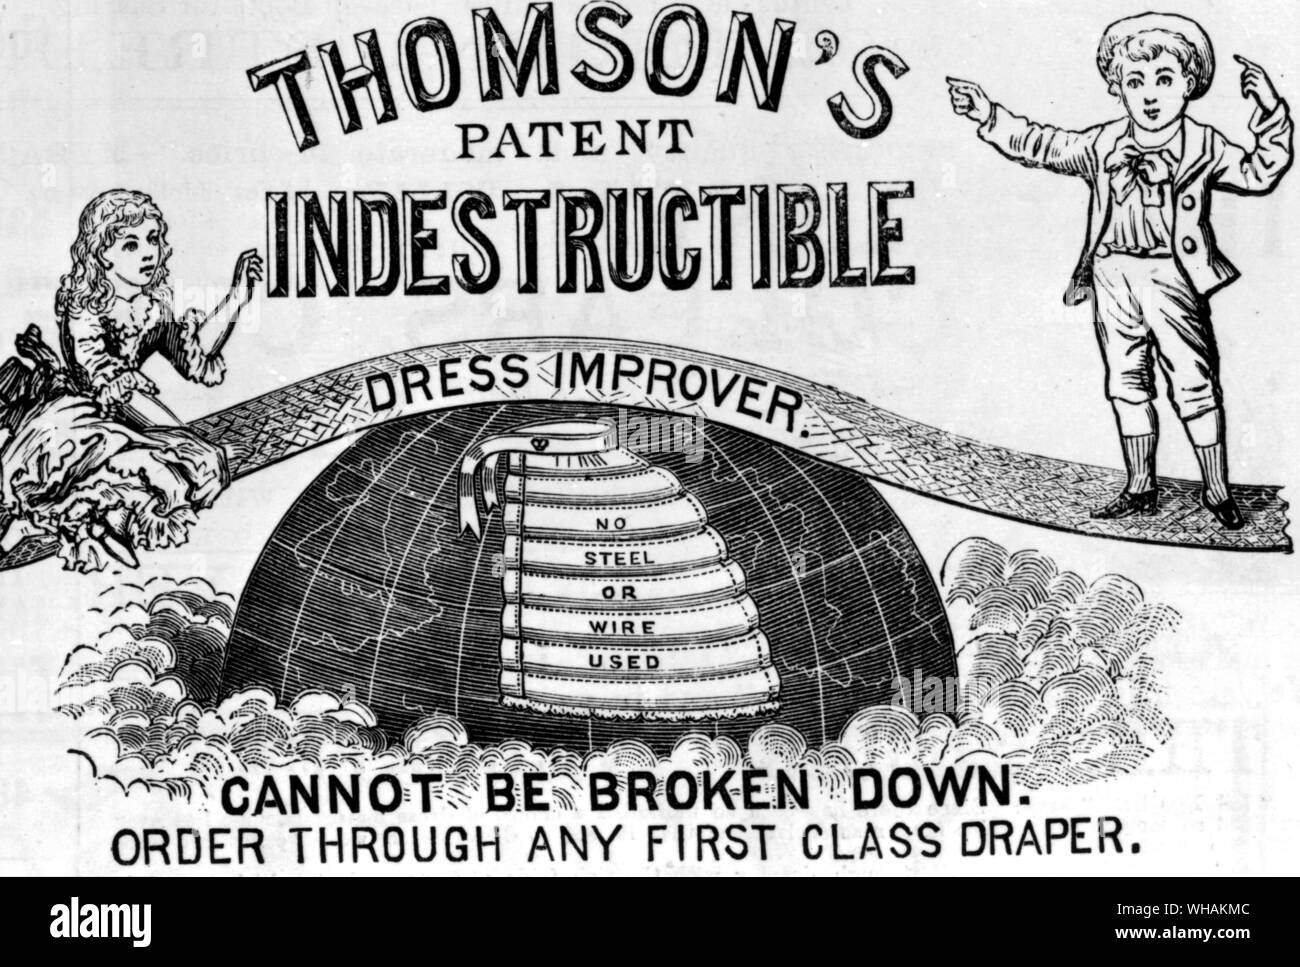 The Queen December 11th 1886. Indestructible dress improver Stock Photo